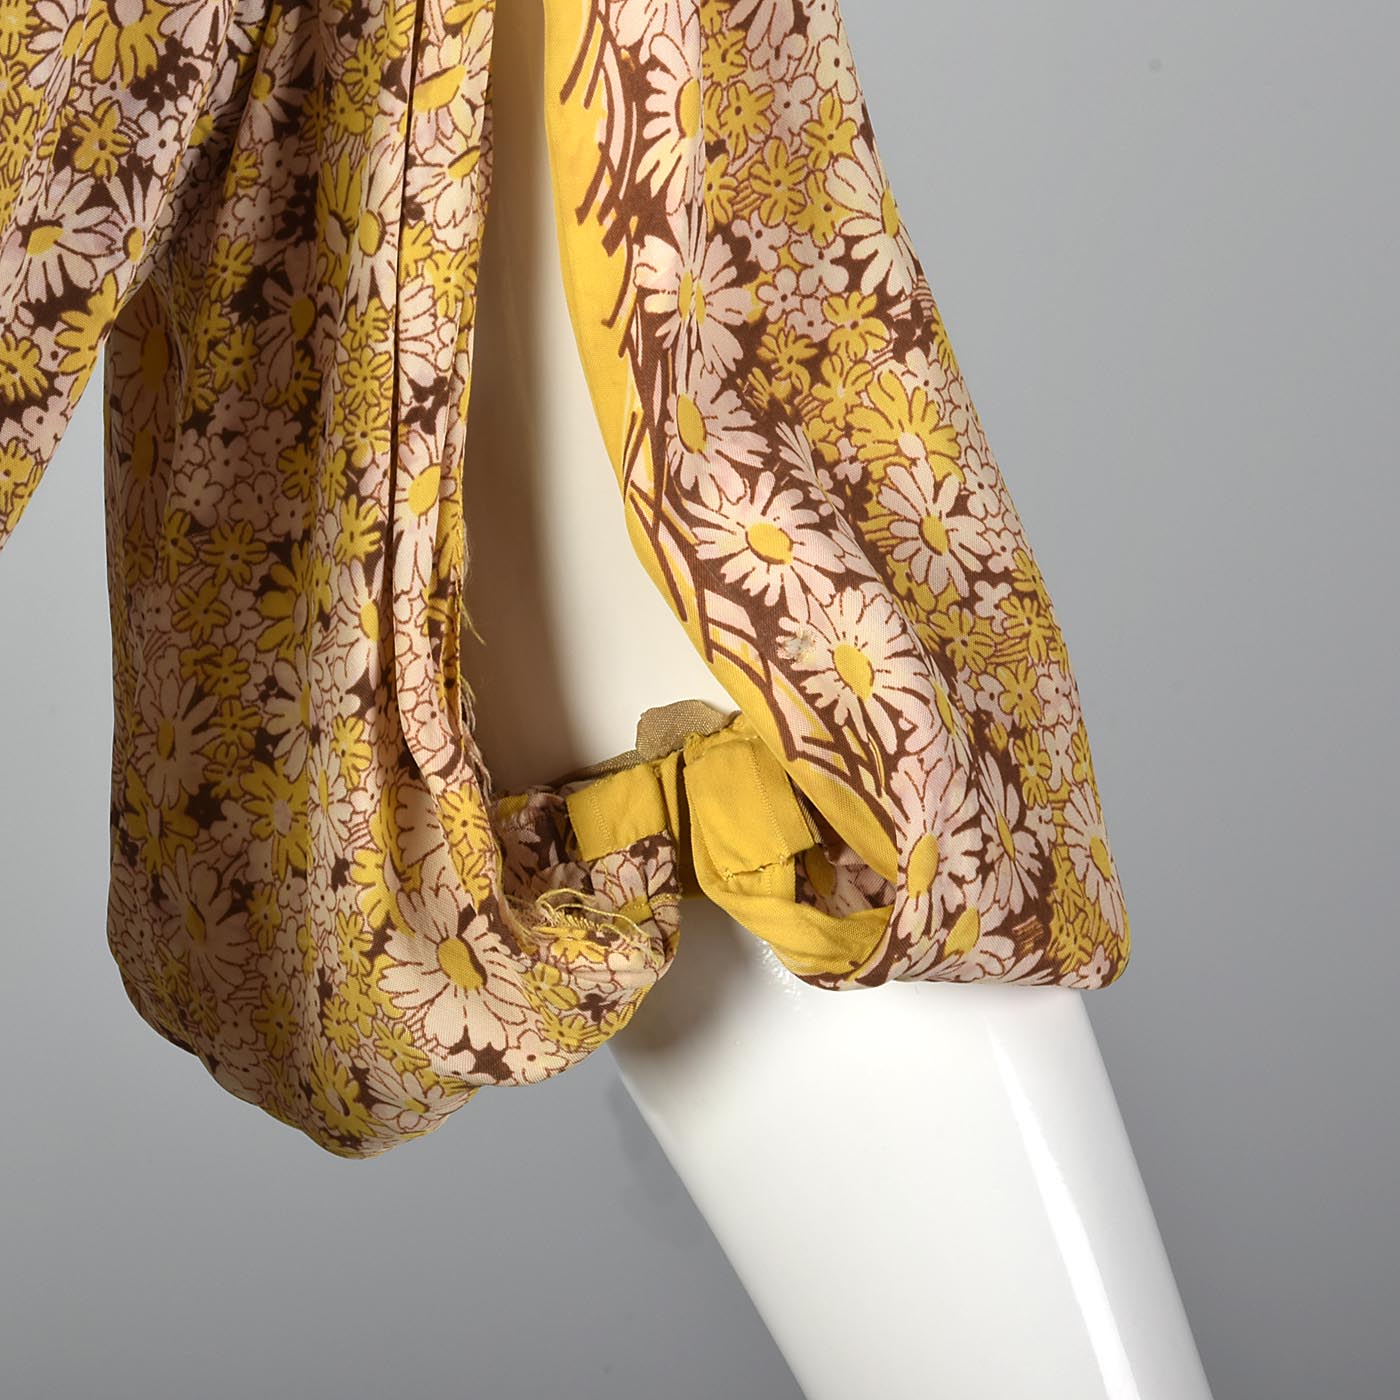 1930s Yellow Floral Dress with Open Sleeve Jacket